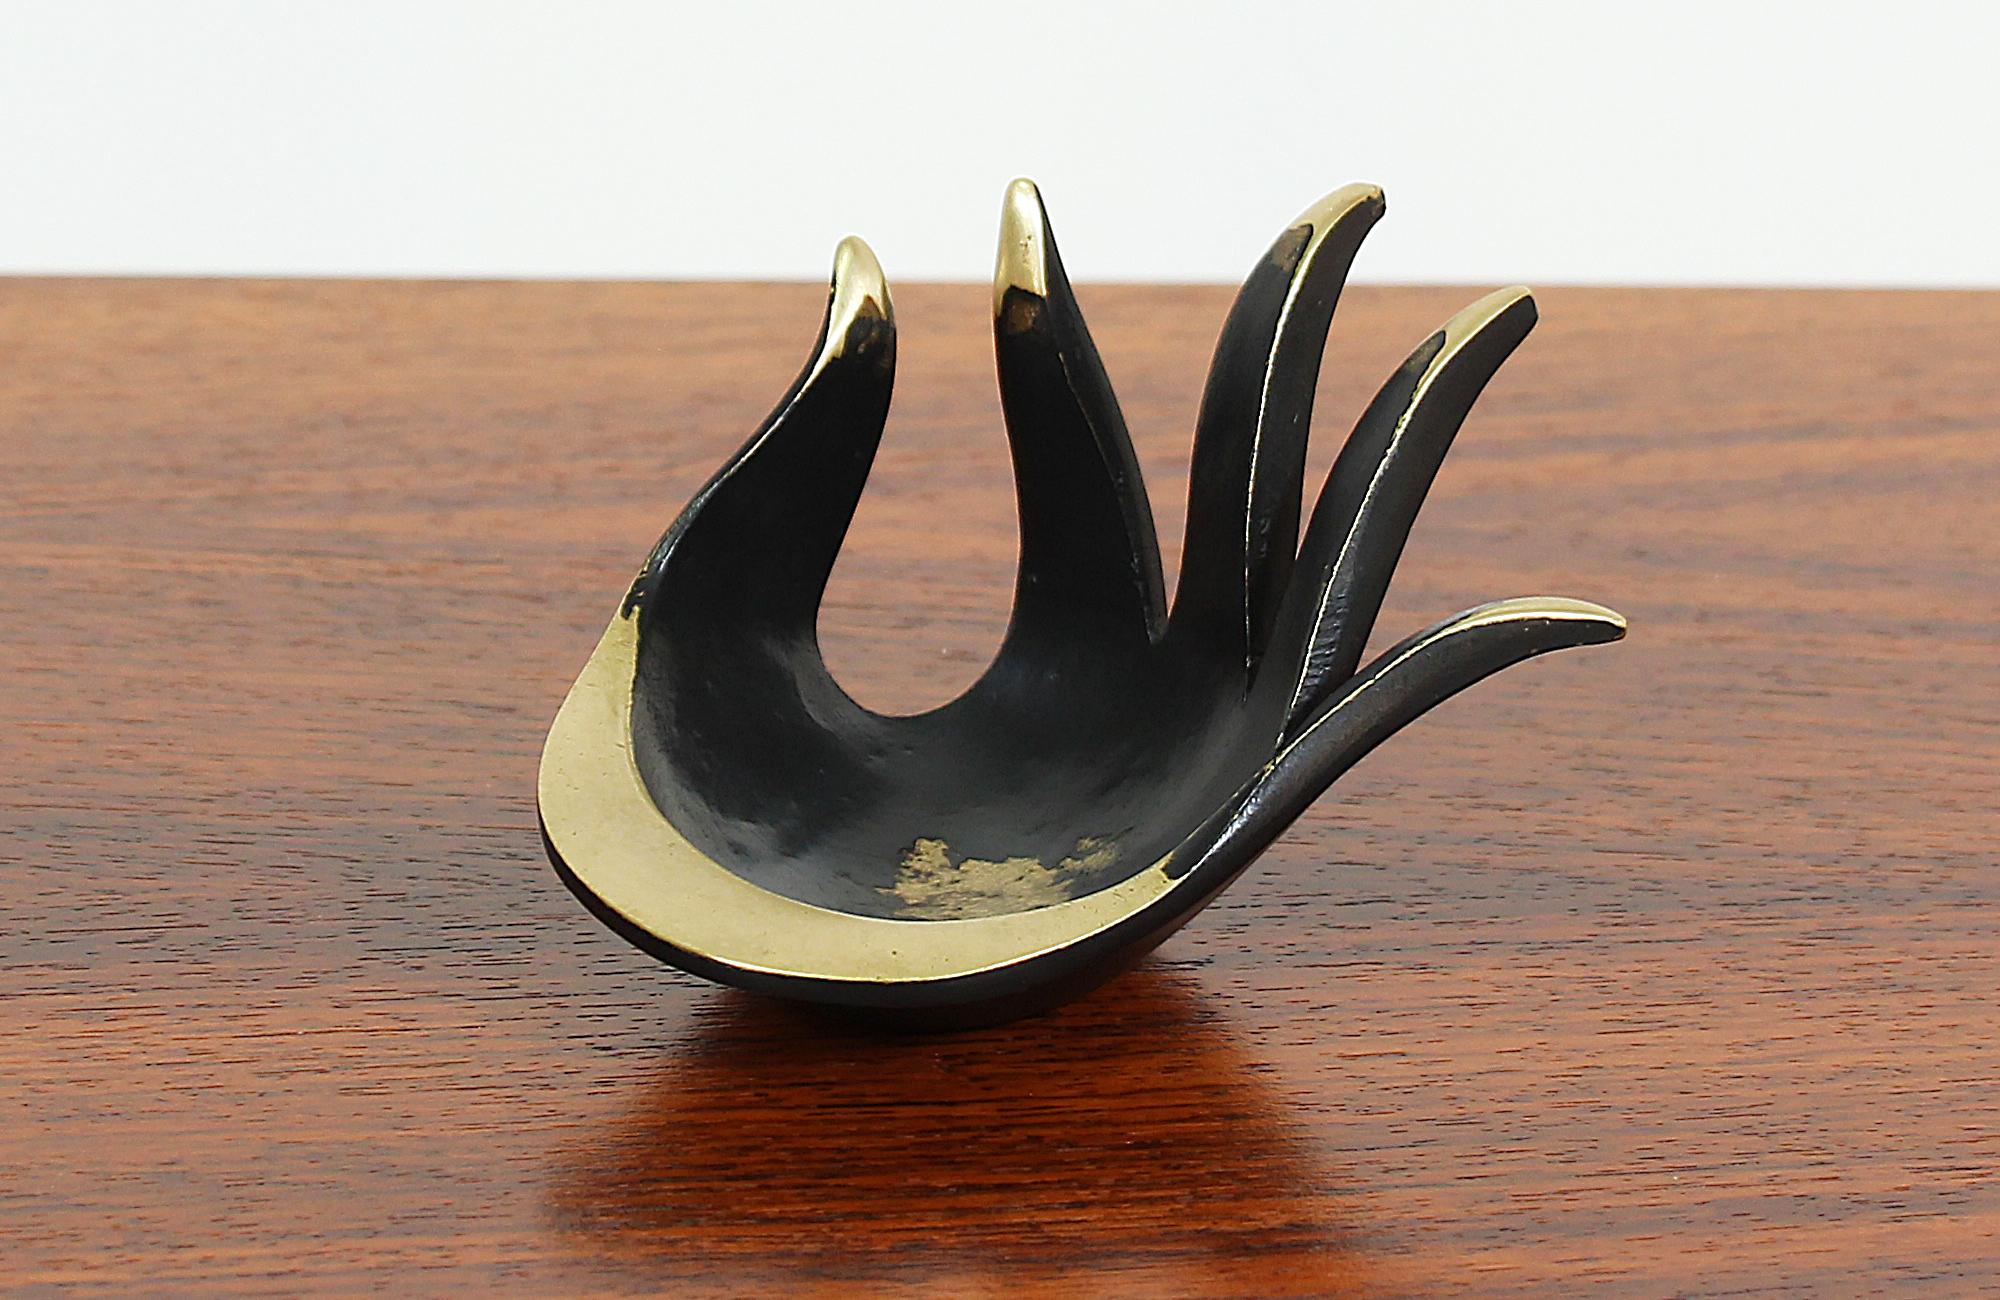 Modernist hand sculpture designed and manufactured in Taxco, Mexico circa 1960s. This sculpture carved with precision is made of brass showing a beautiful black patina throughout. This versatile item could be used as an ashtray, a ring holder, or